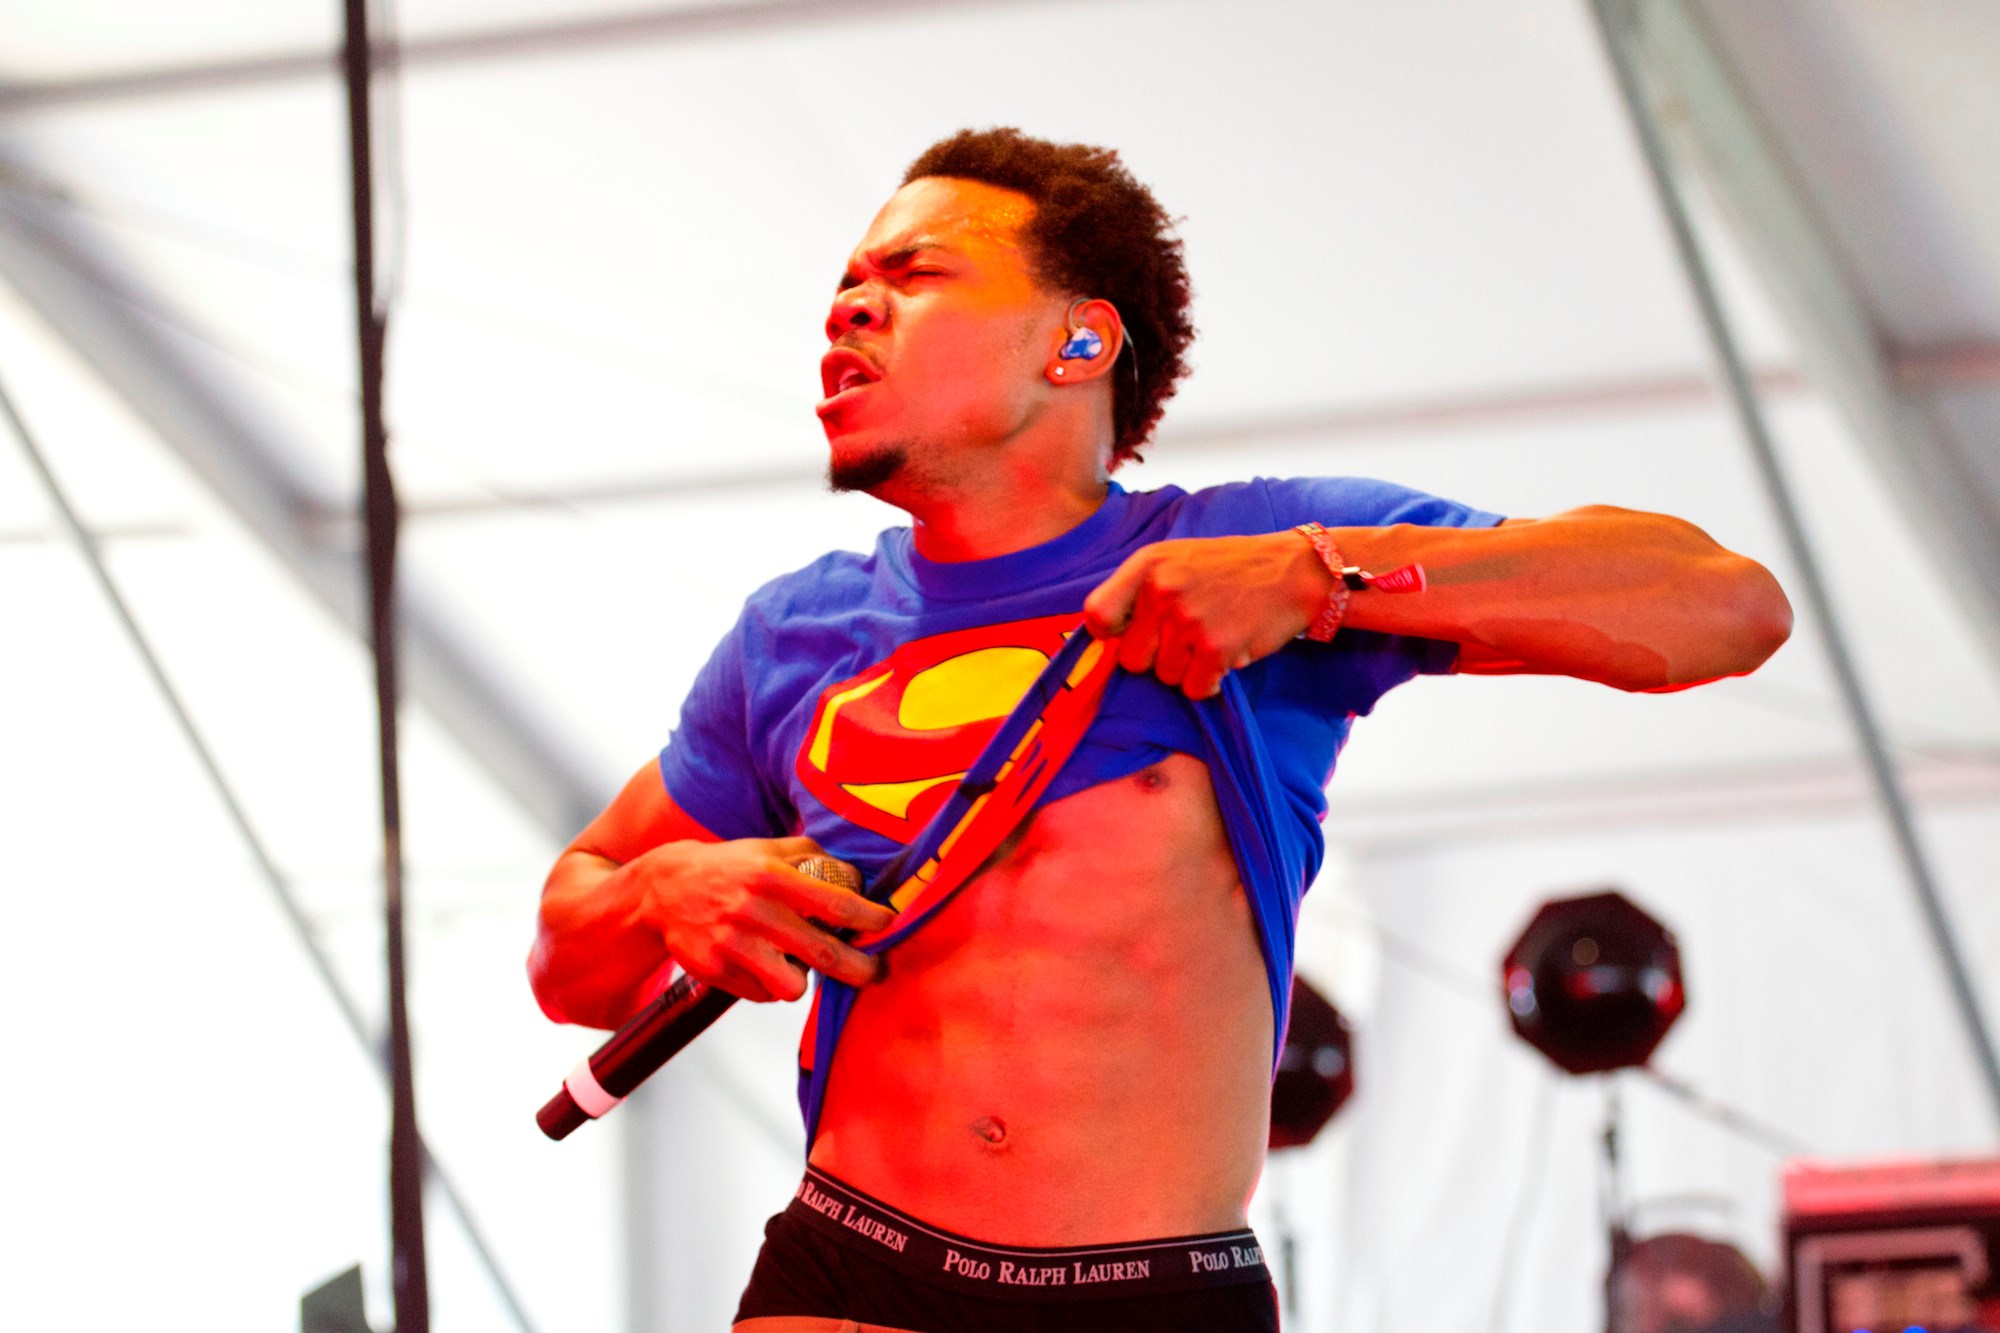 Hq Res Chance The Rapper - Chance The Rapper Govball , HD Wallpaper & Backgrounds